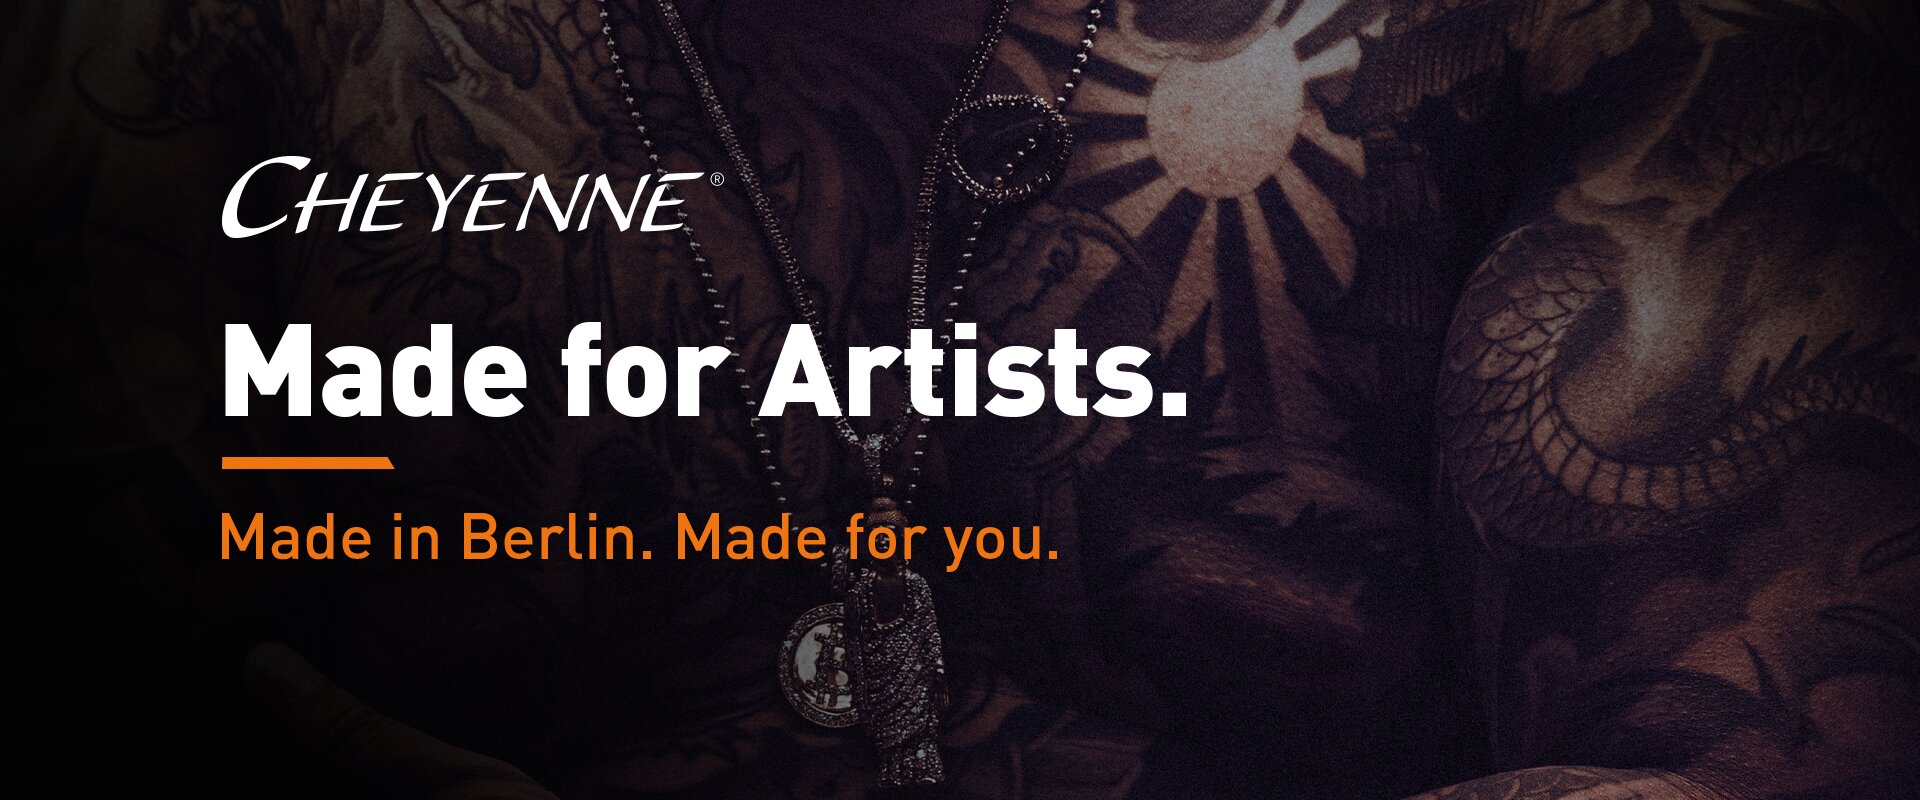 cheyenne-made-for-artists-made-in-berlin-made-for-you